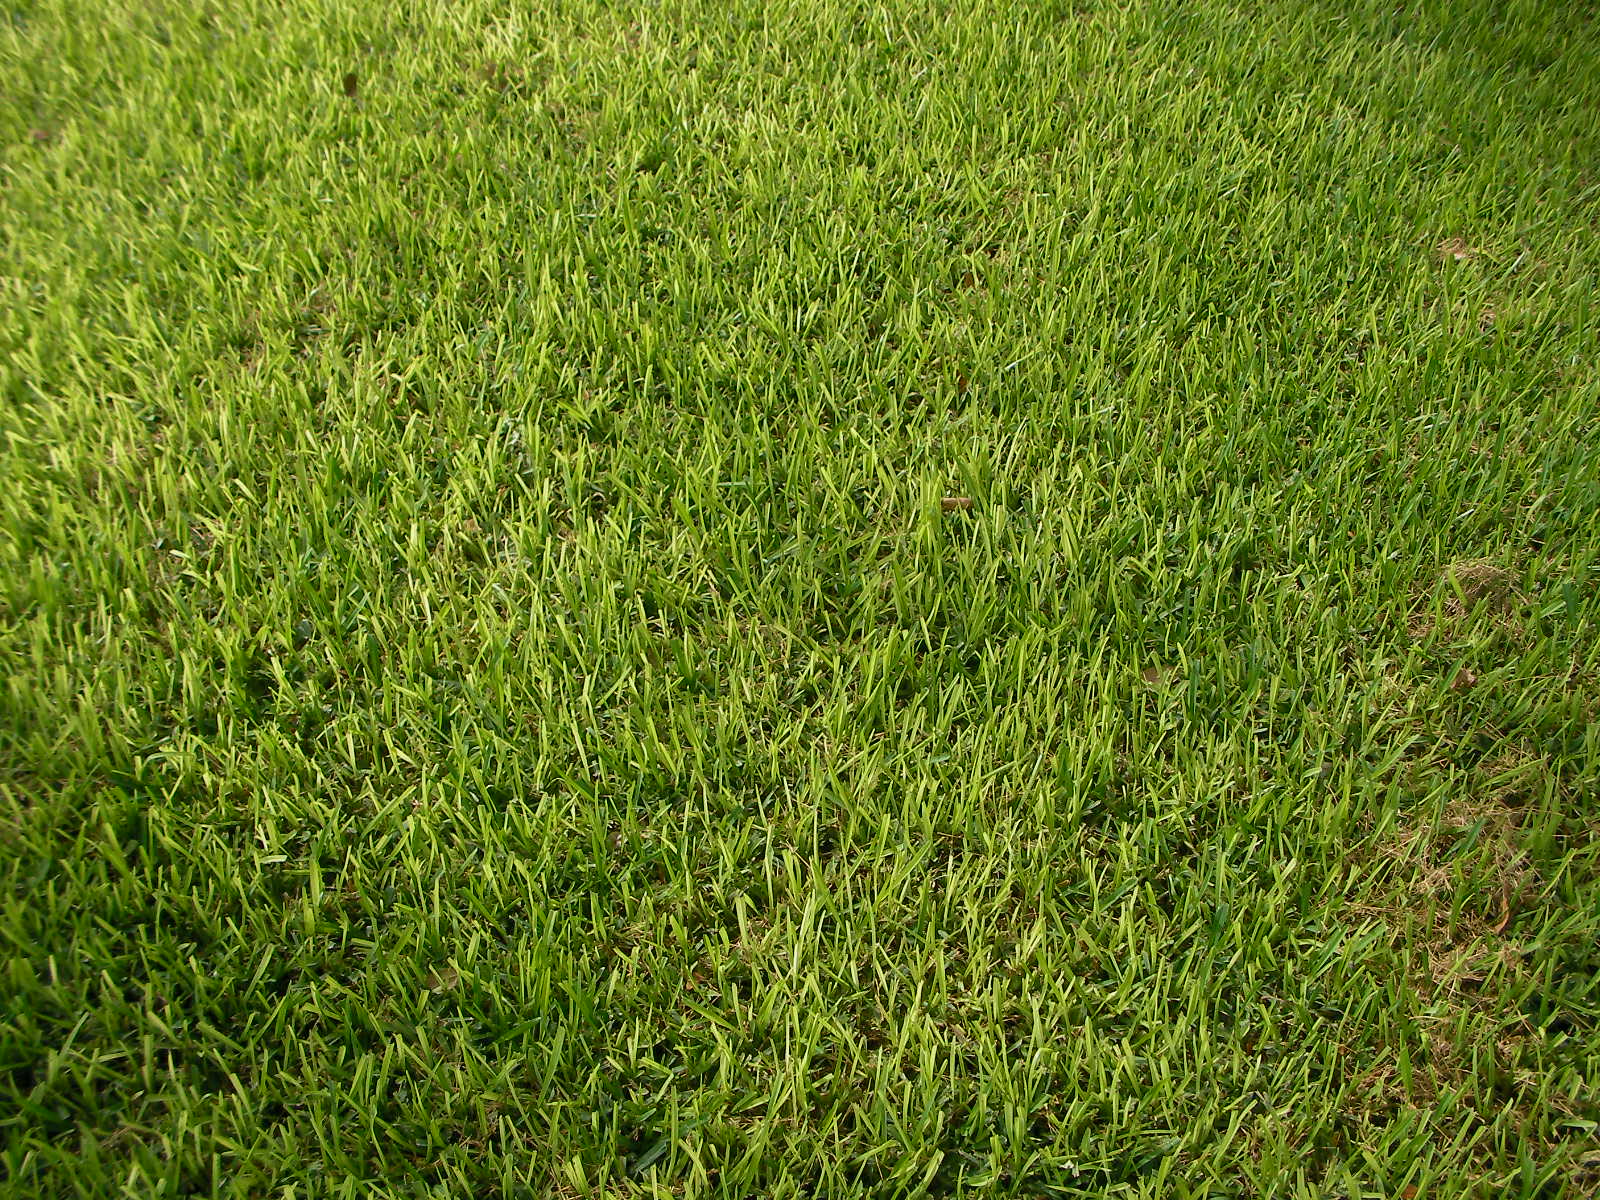 Can I plant grass seed in the winter?